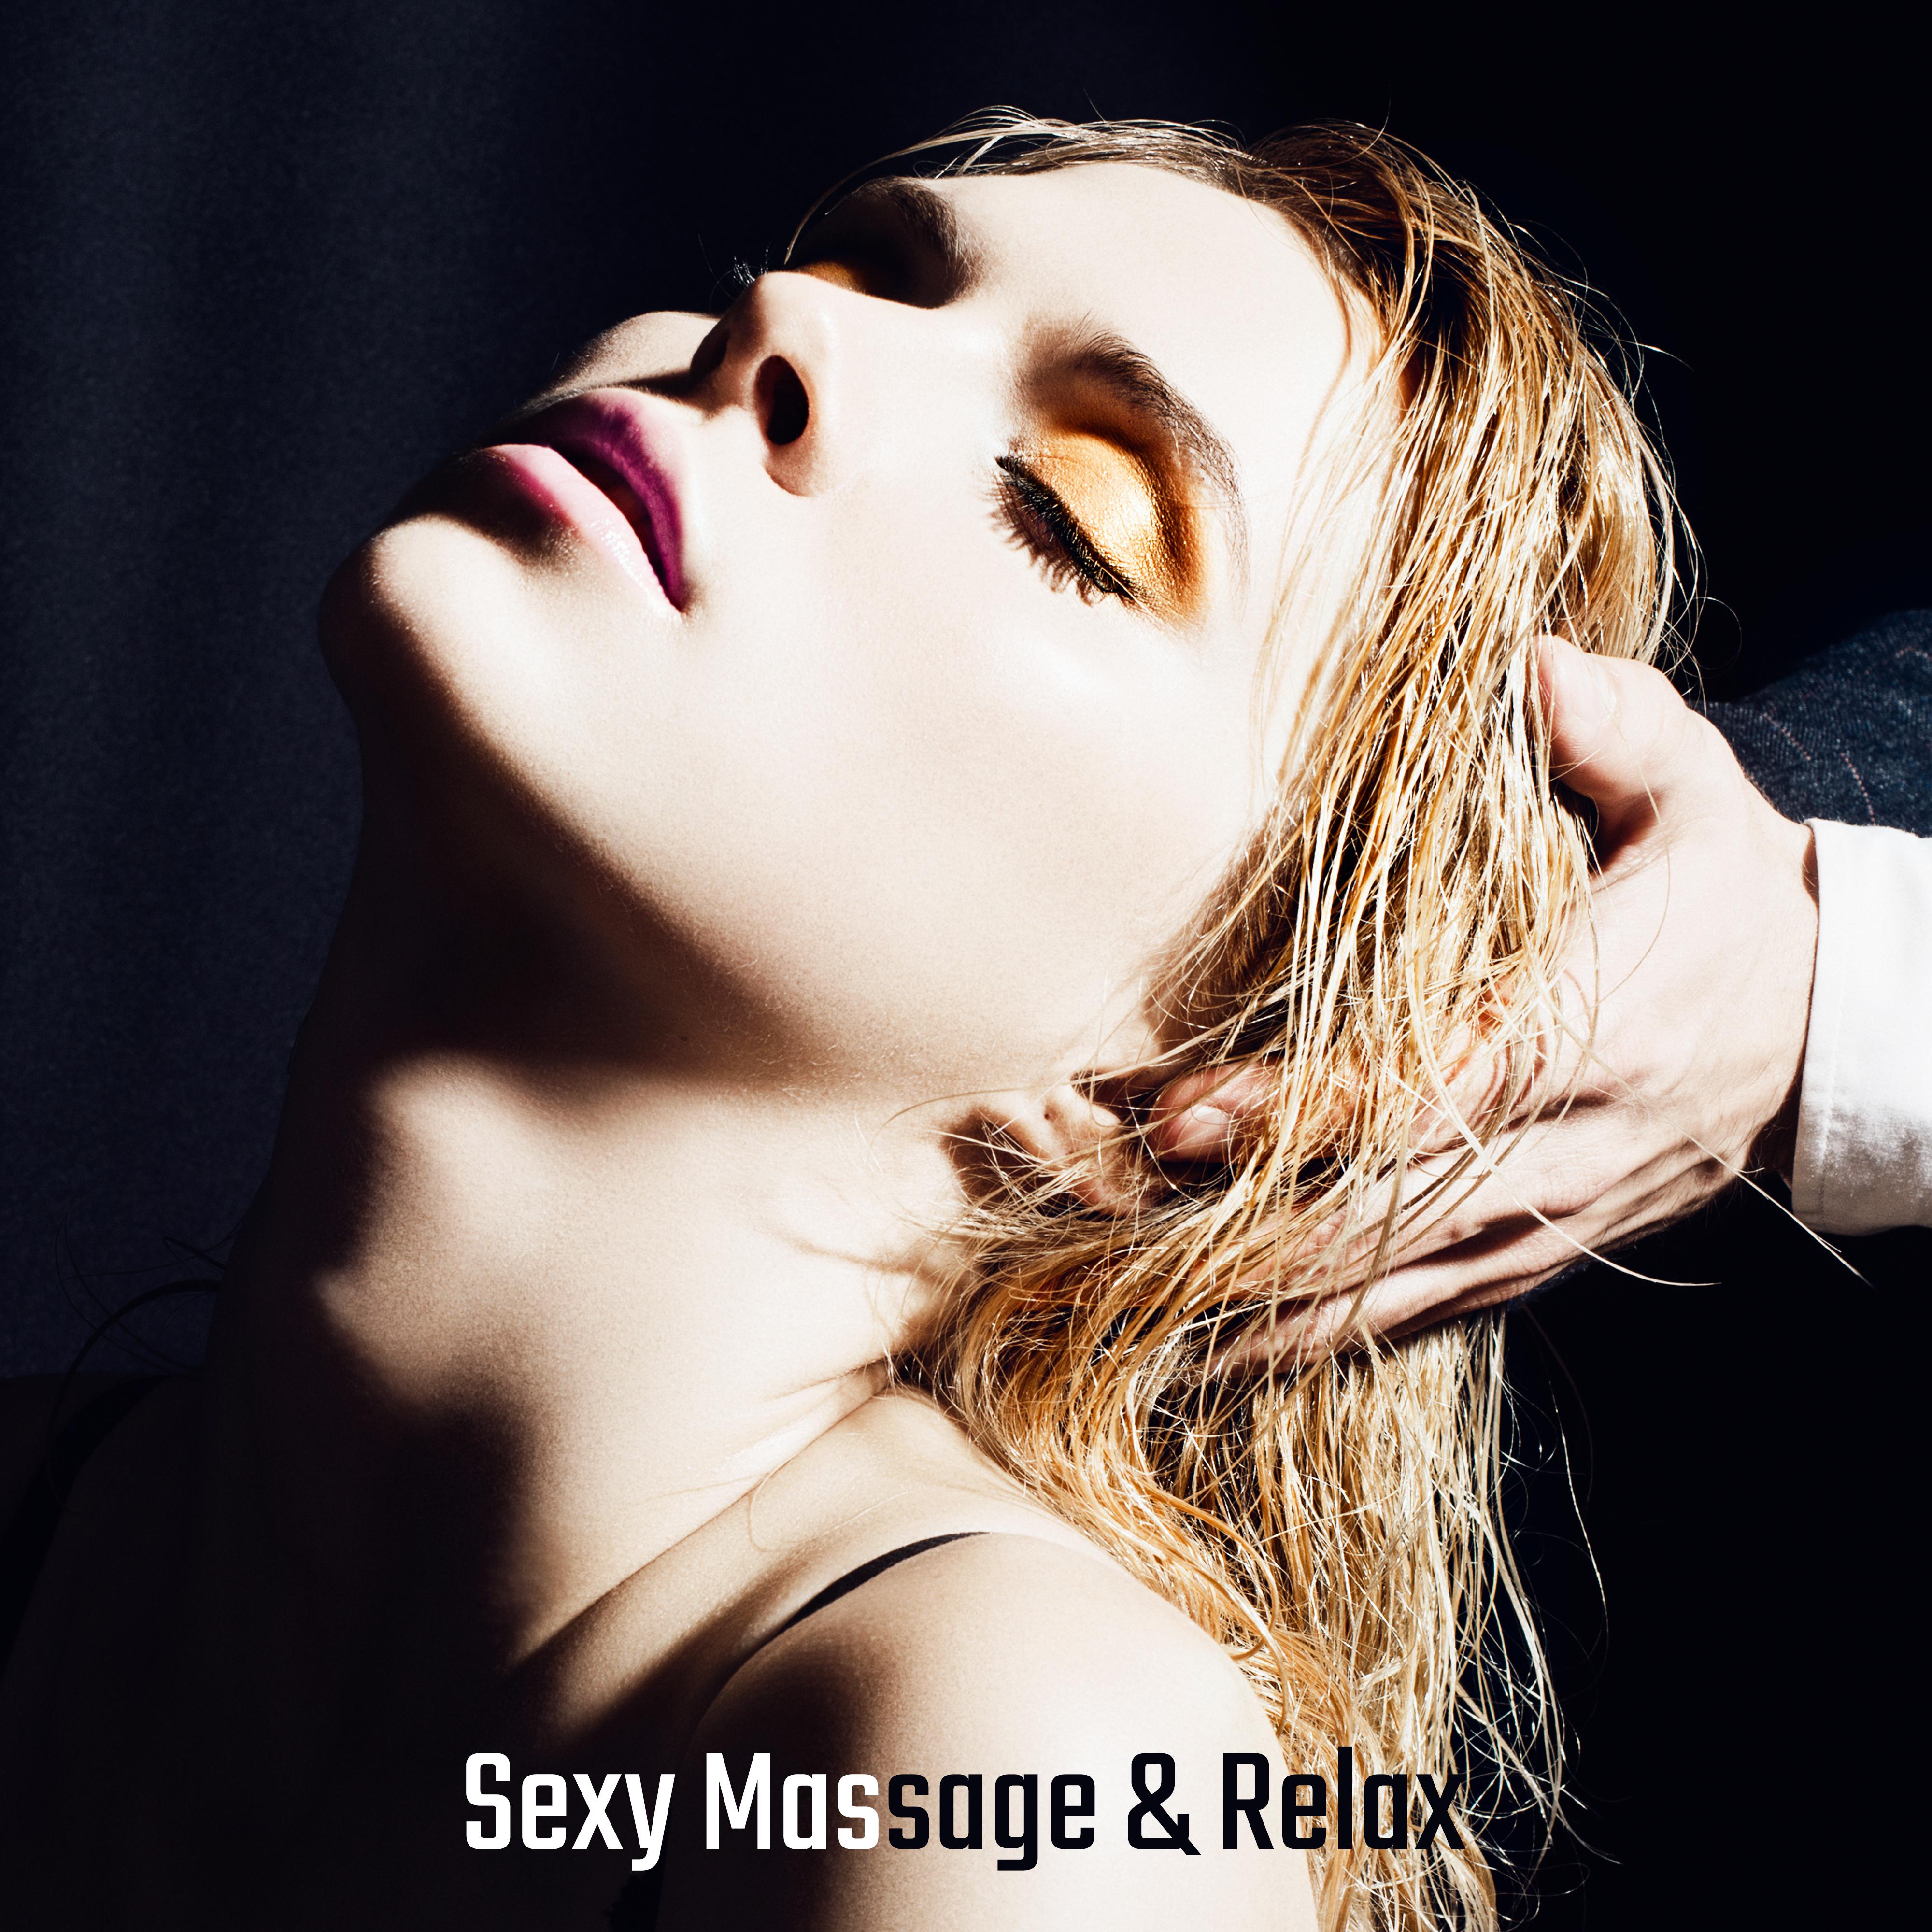 **** Massage & Relax – Sensual Chillout for Lovers, *** Music Zone, Making Love, **** Vibes